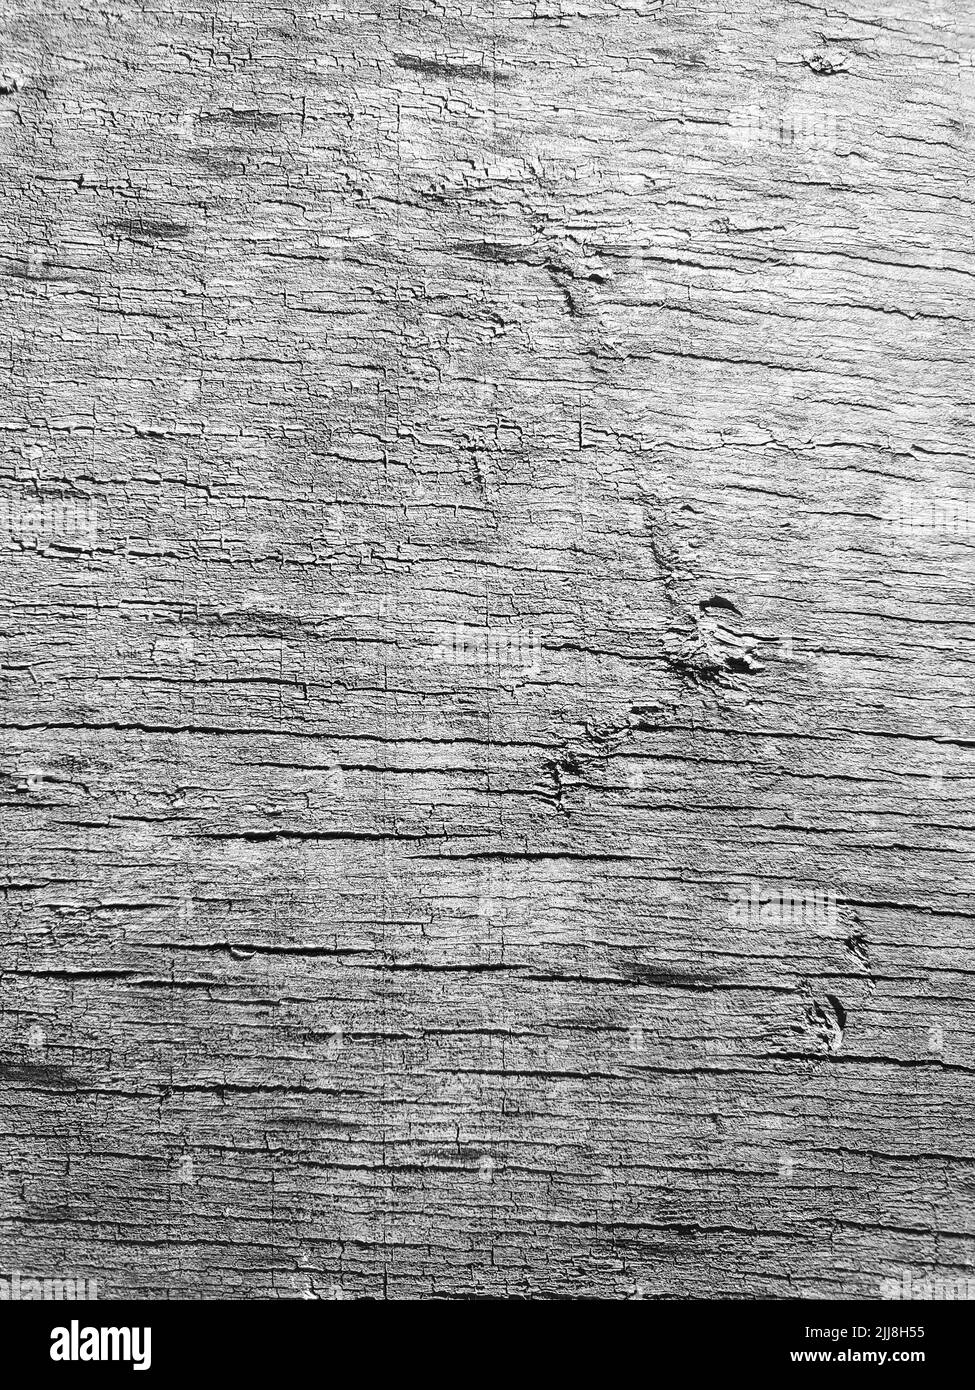 old wood background crackled aged board texture Stock Photo